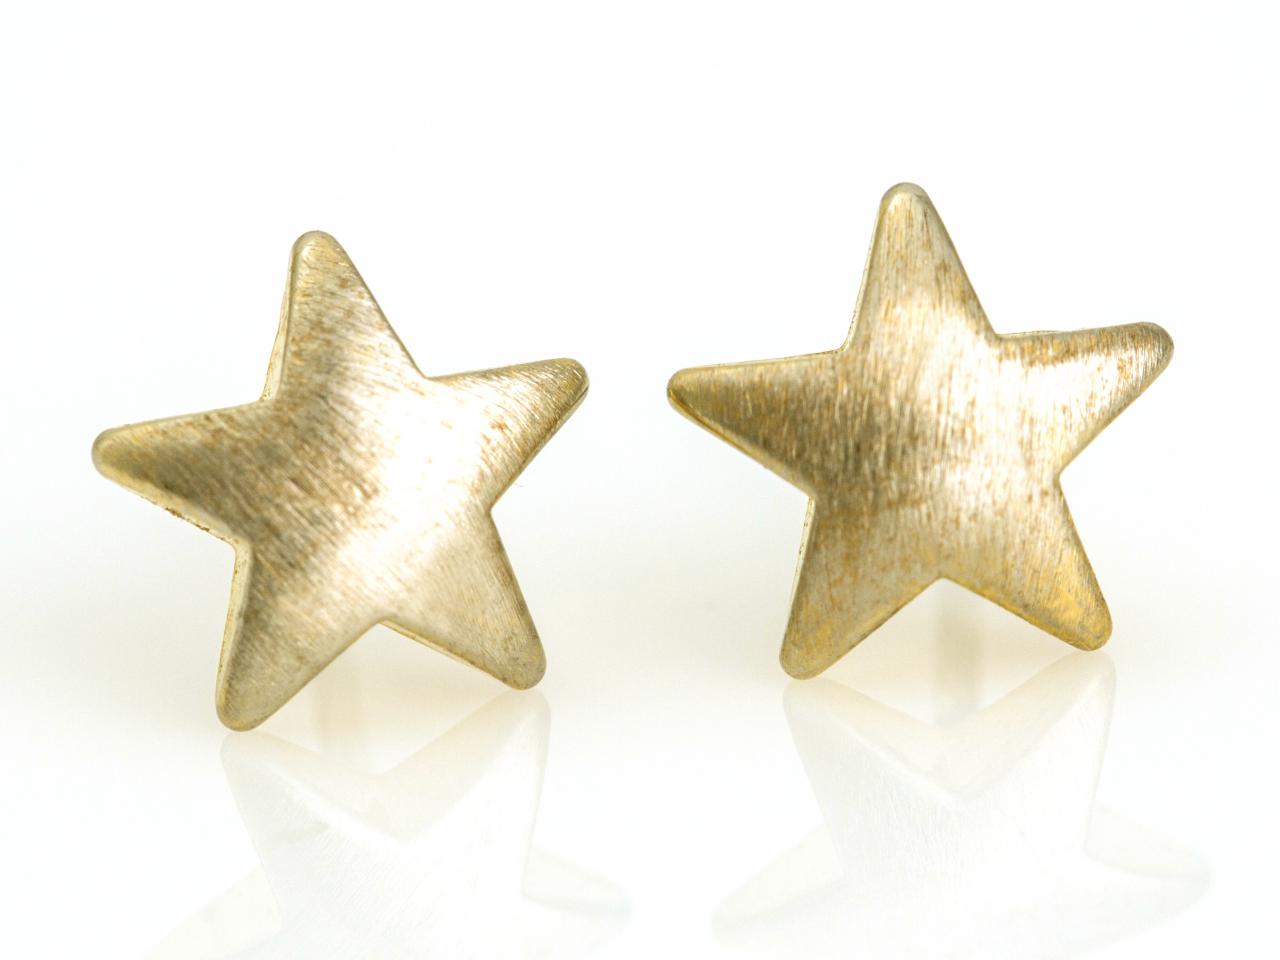 1 Star Earrings Delicate Scratch Star Stud Gold Plated Over Brass 5nbae10